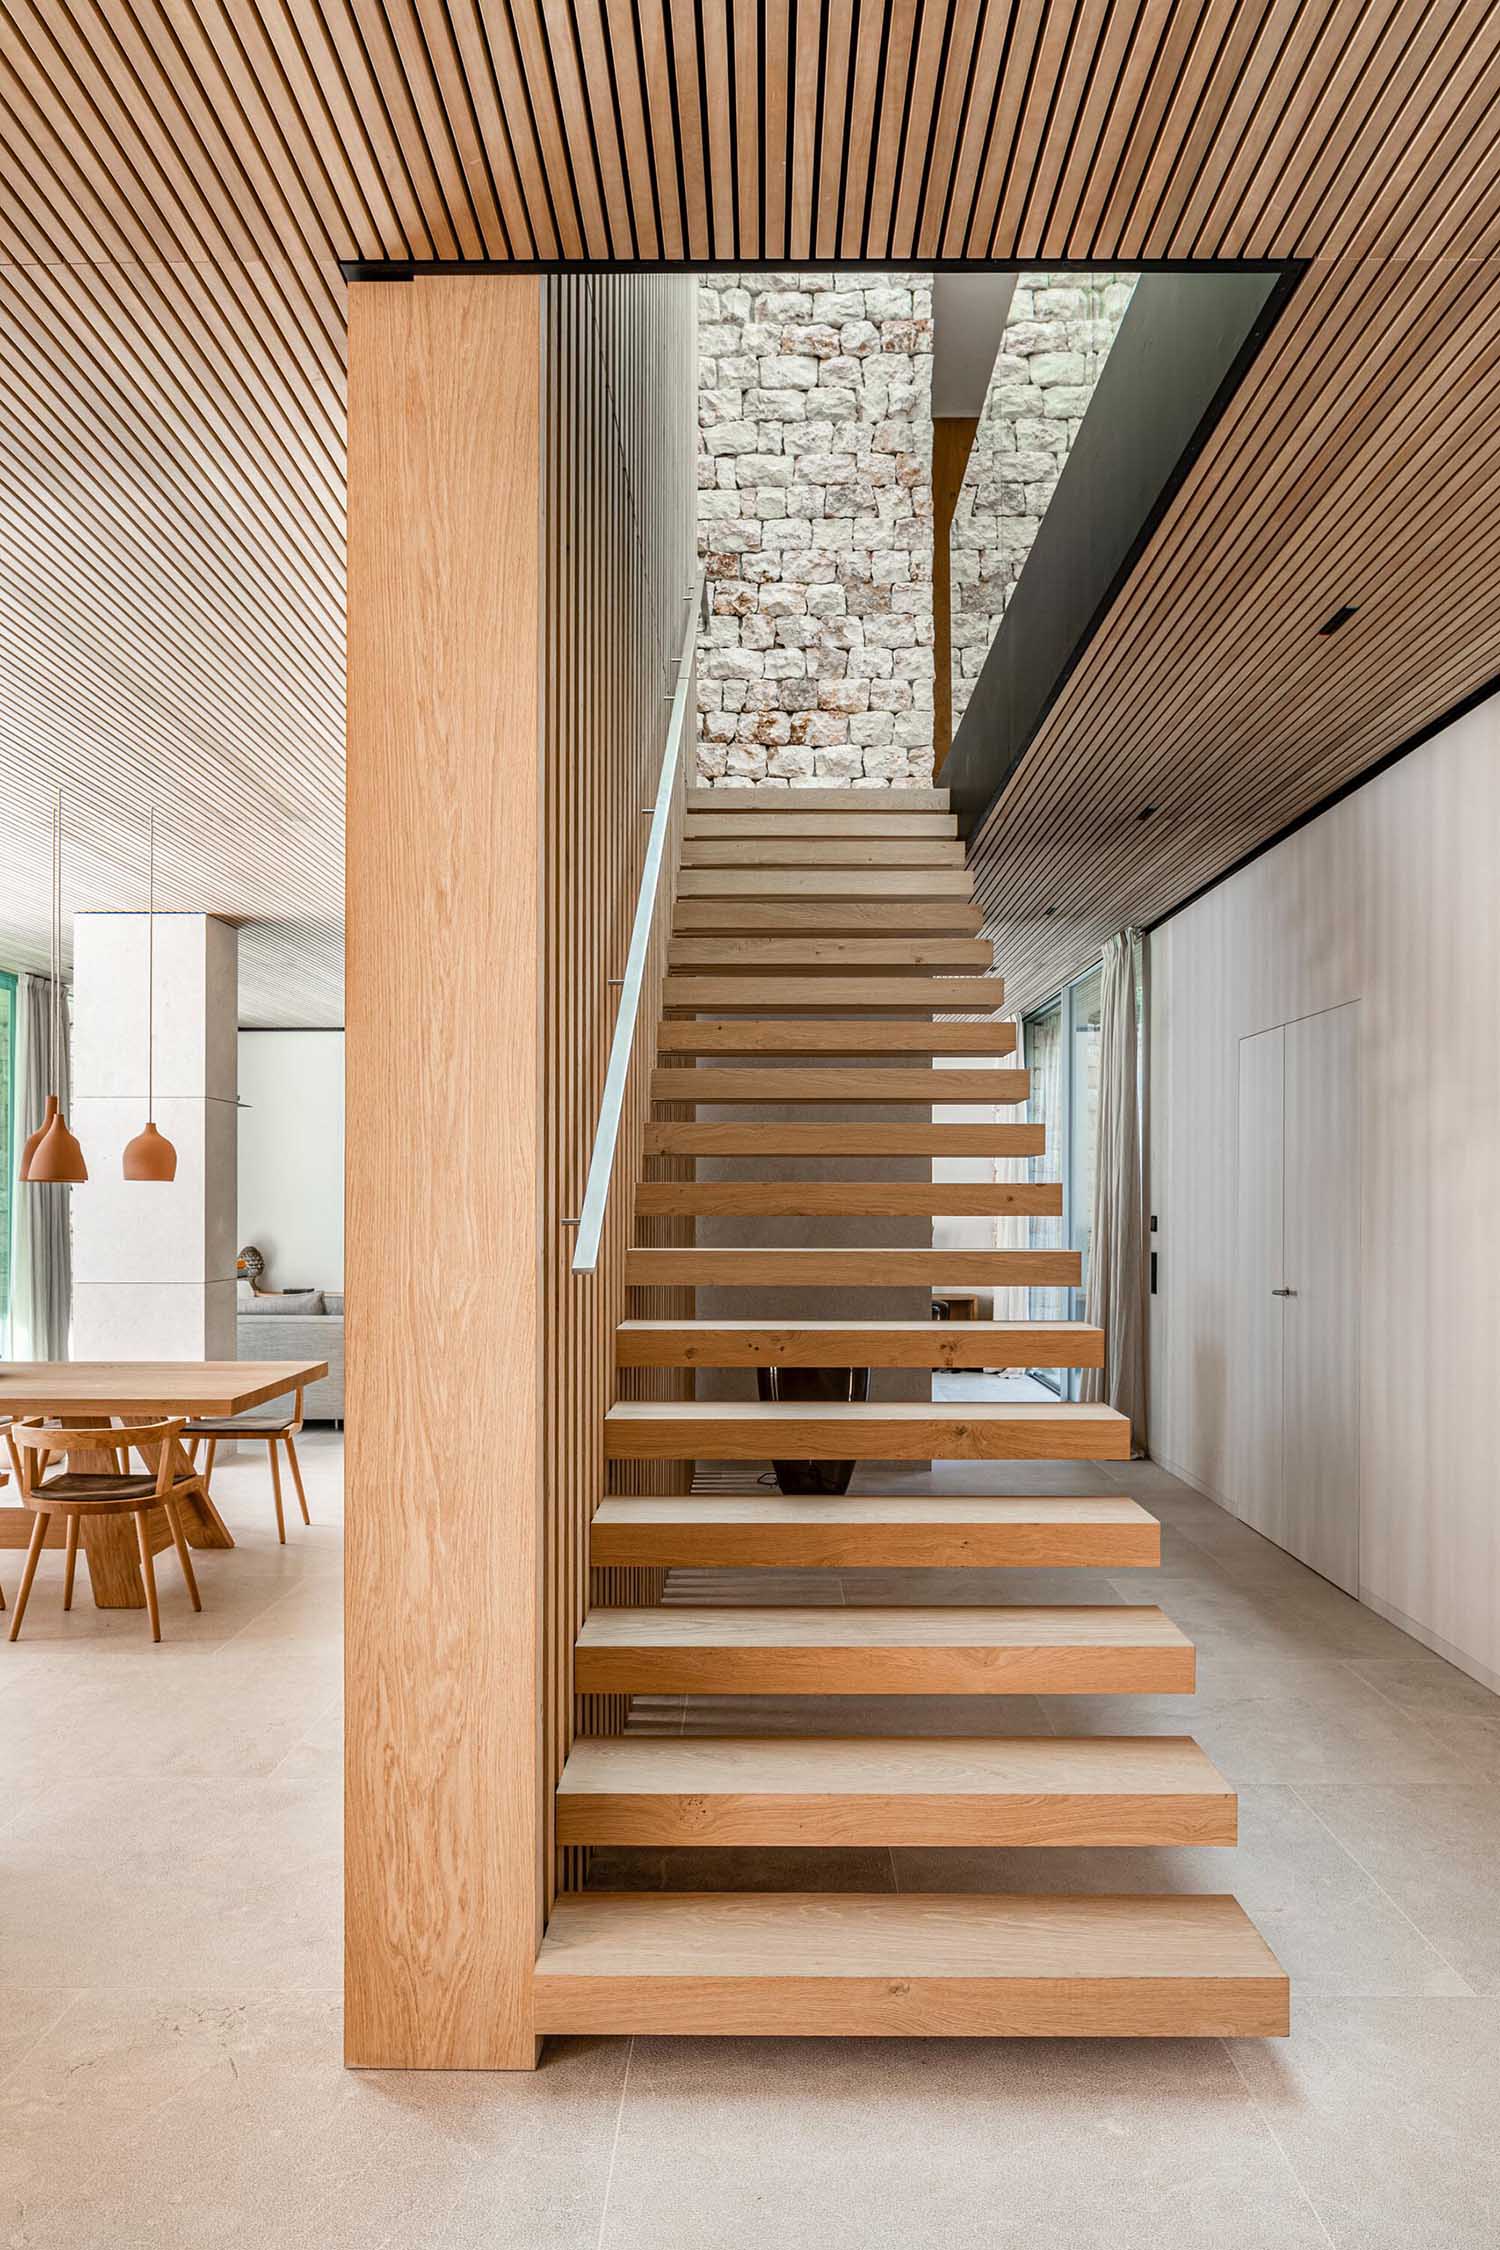 A modern house with wood stairs.